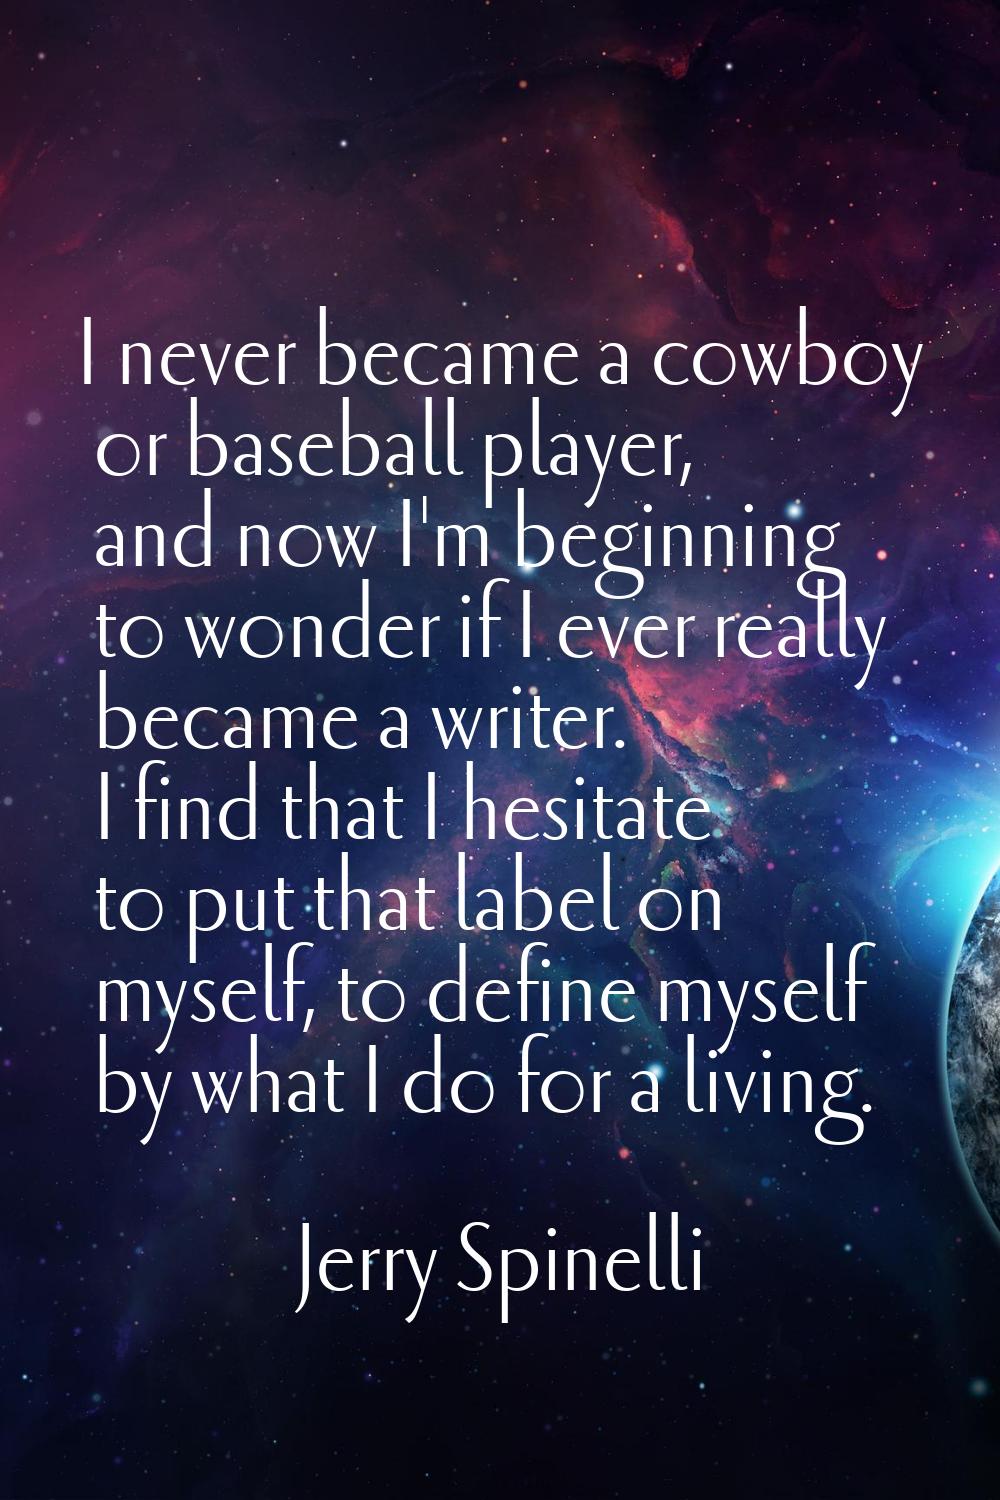 I never became a cowboy or baseball player, and now I'm beginning to wonder if I ever really became